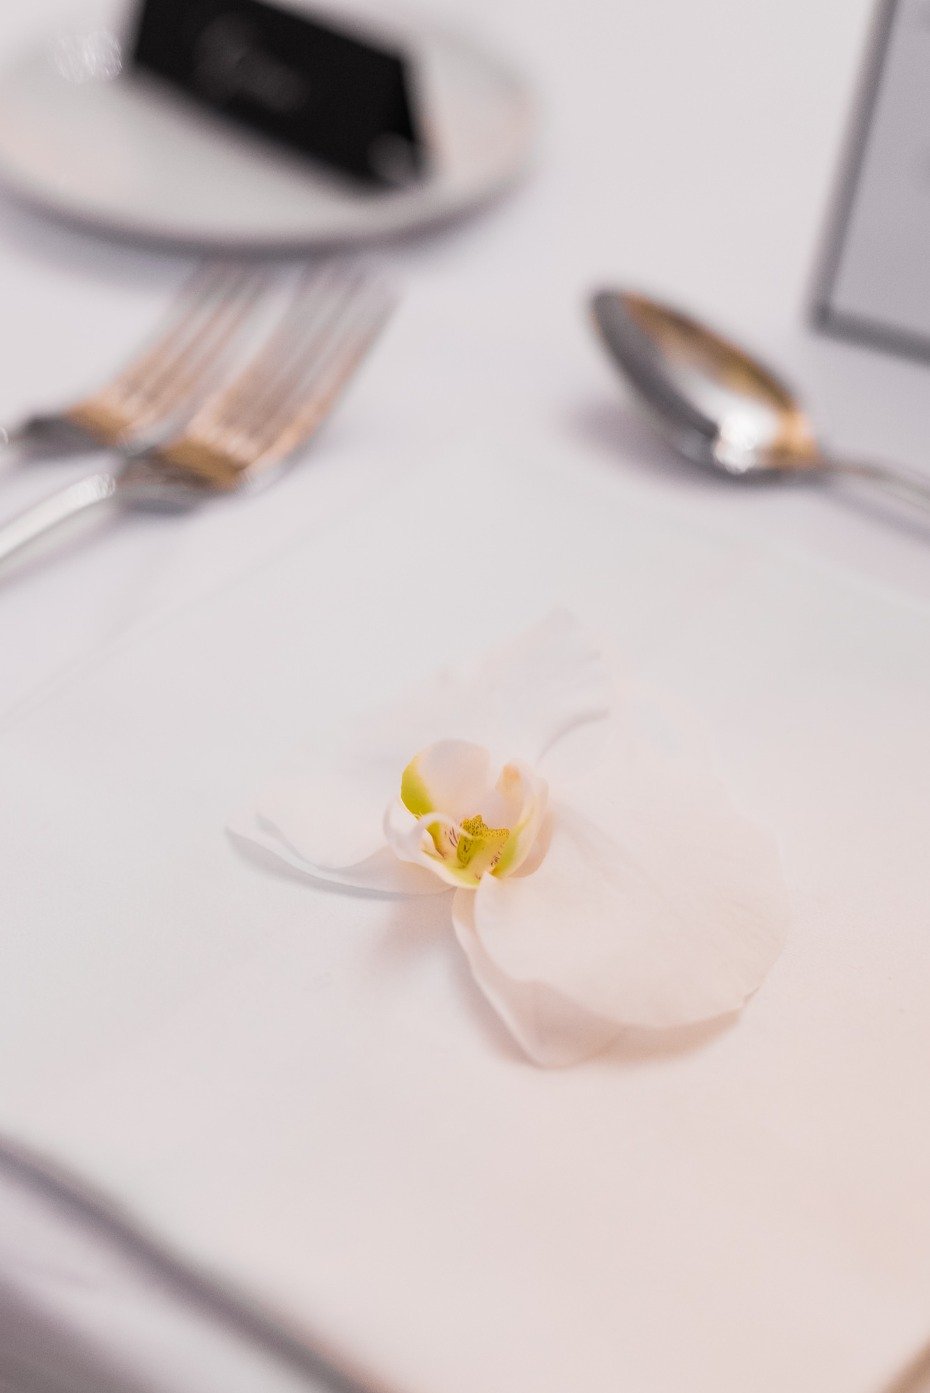 Orchid place setting for a wedding